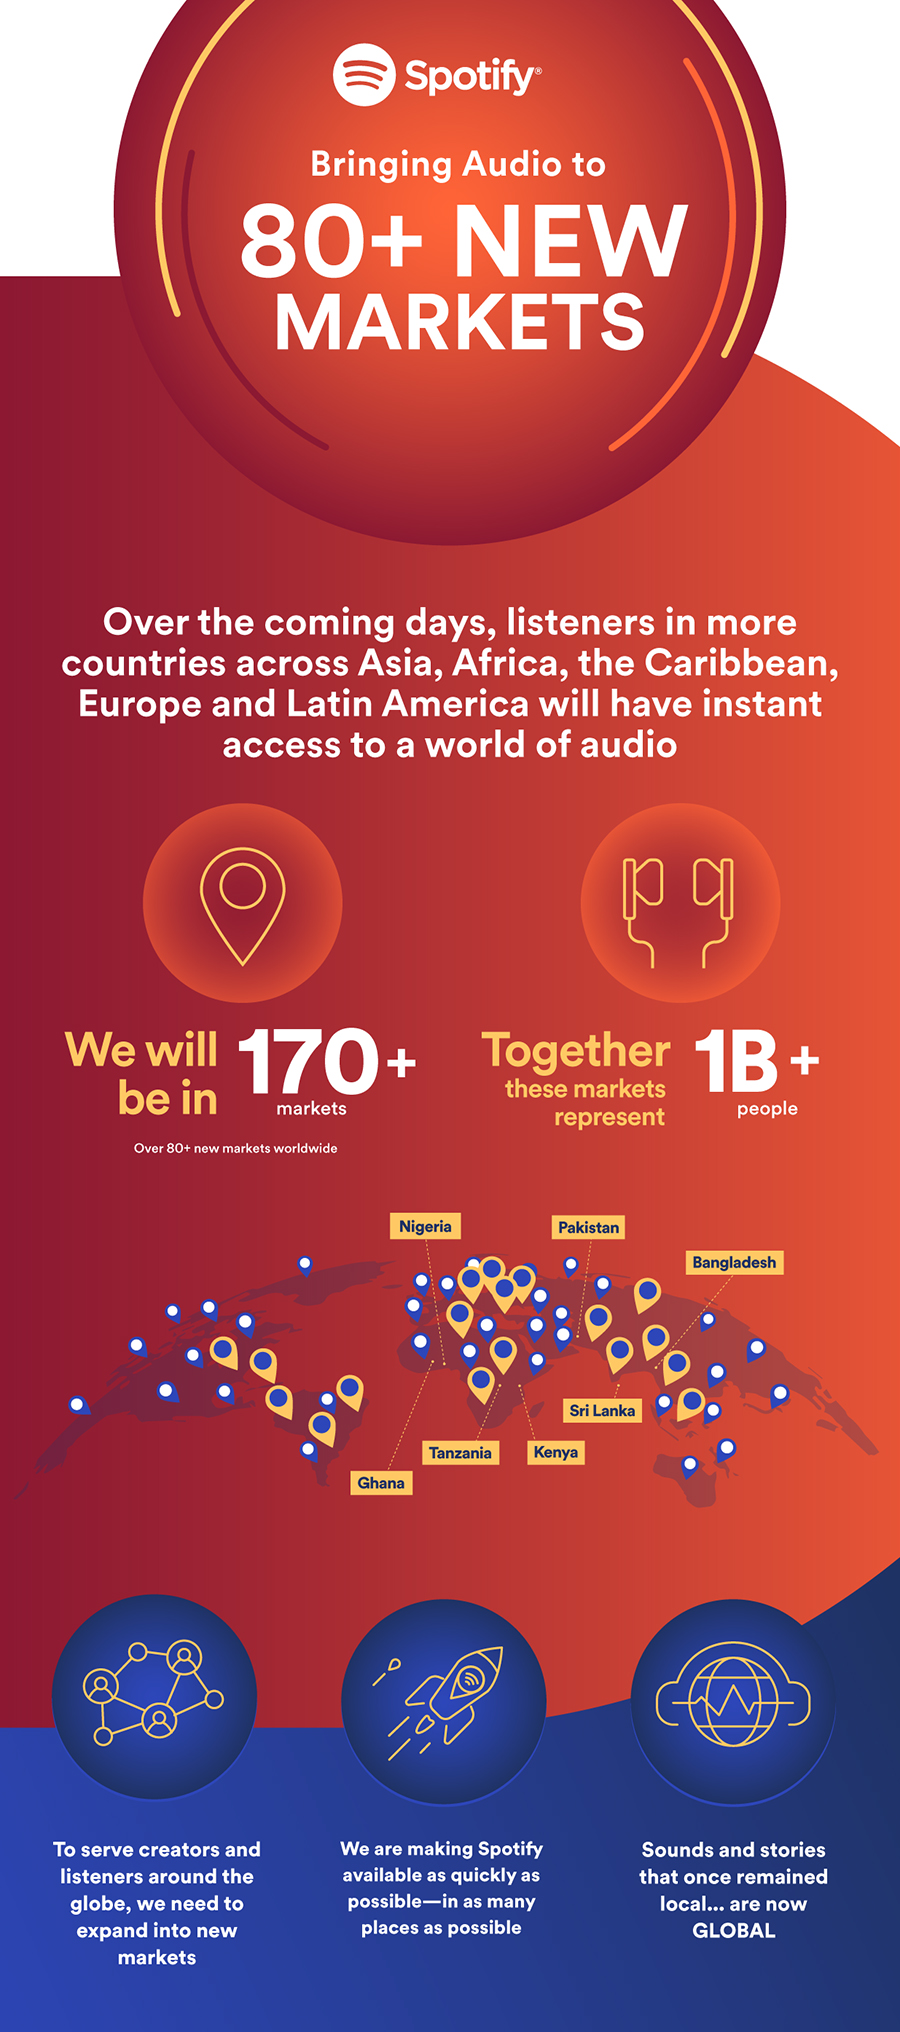 Image for Spotify Expands International Footprint, Bringing Audio To 80+ New Markets